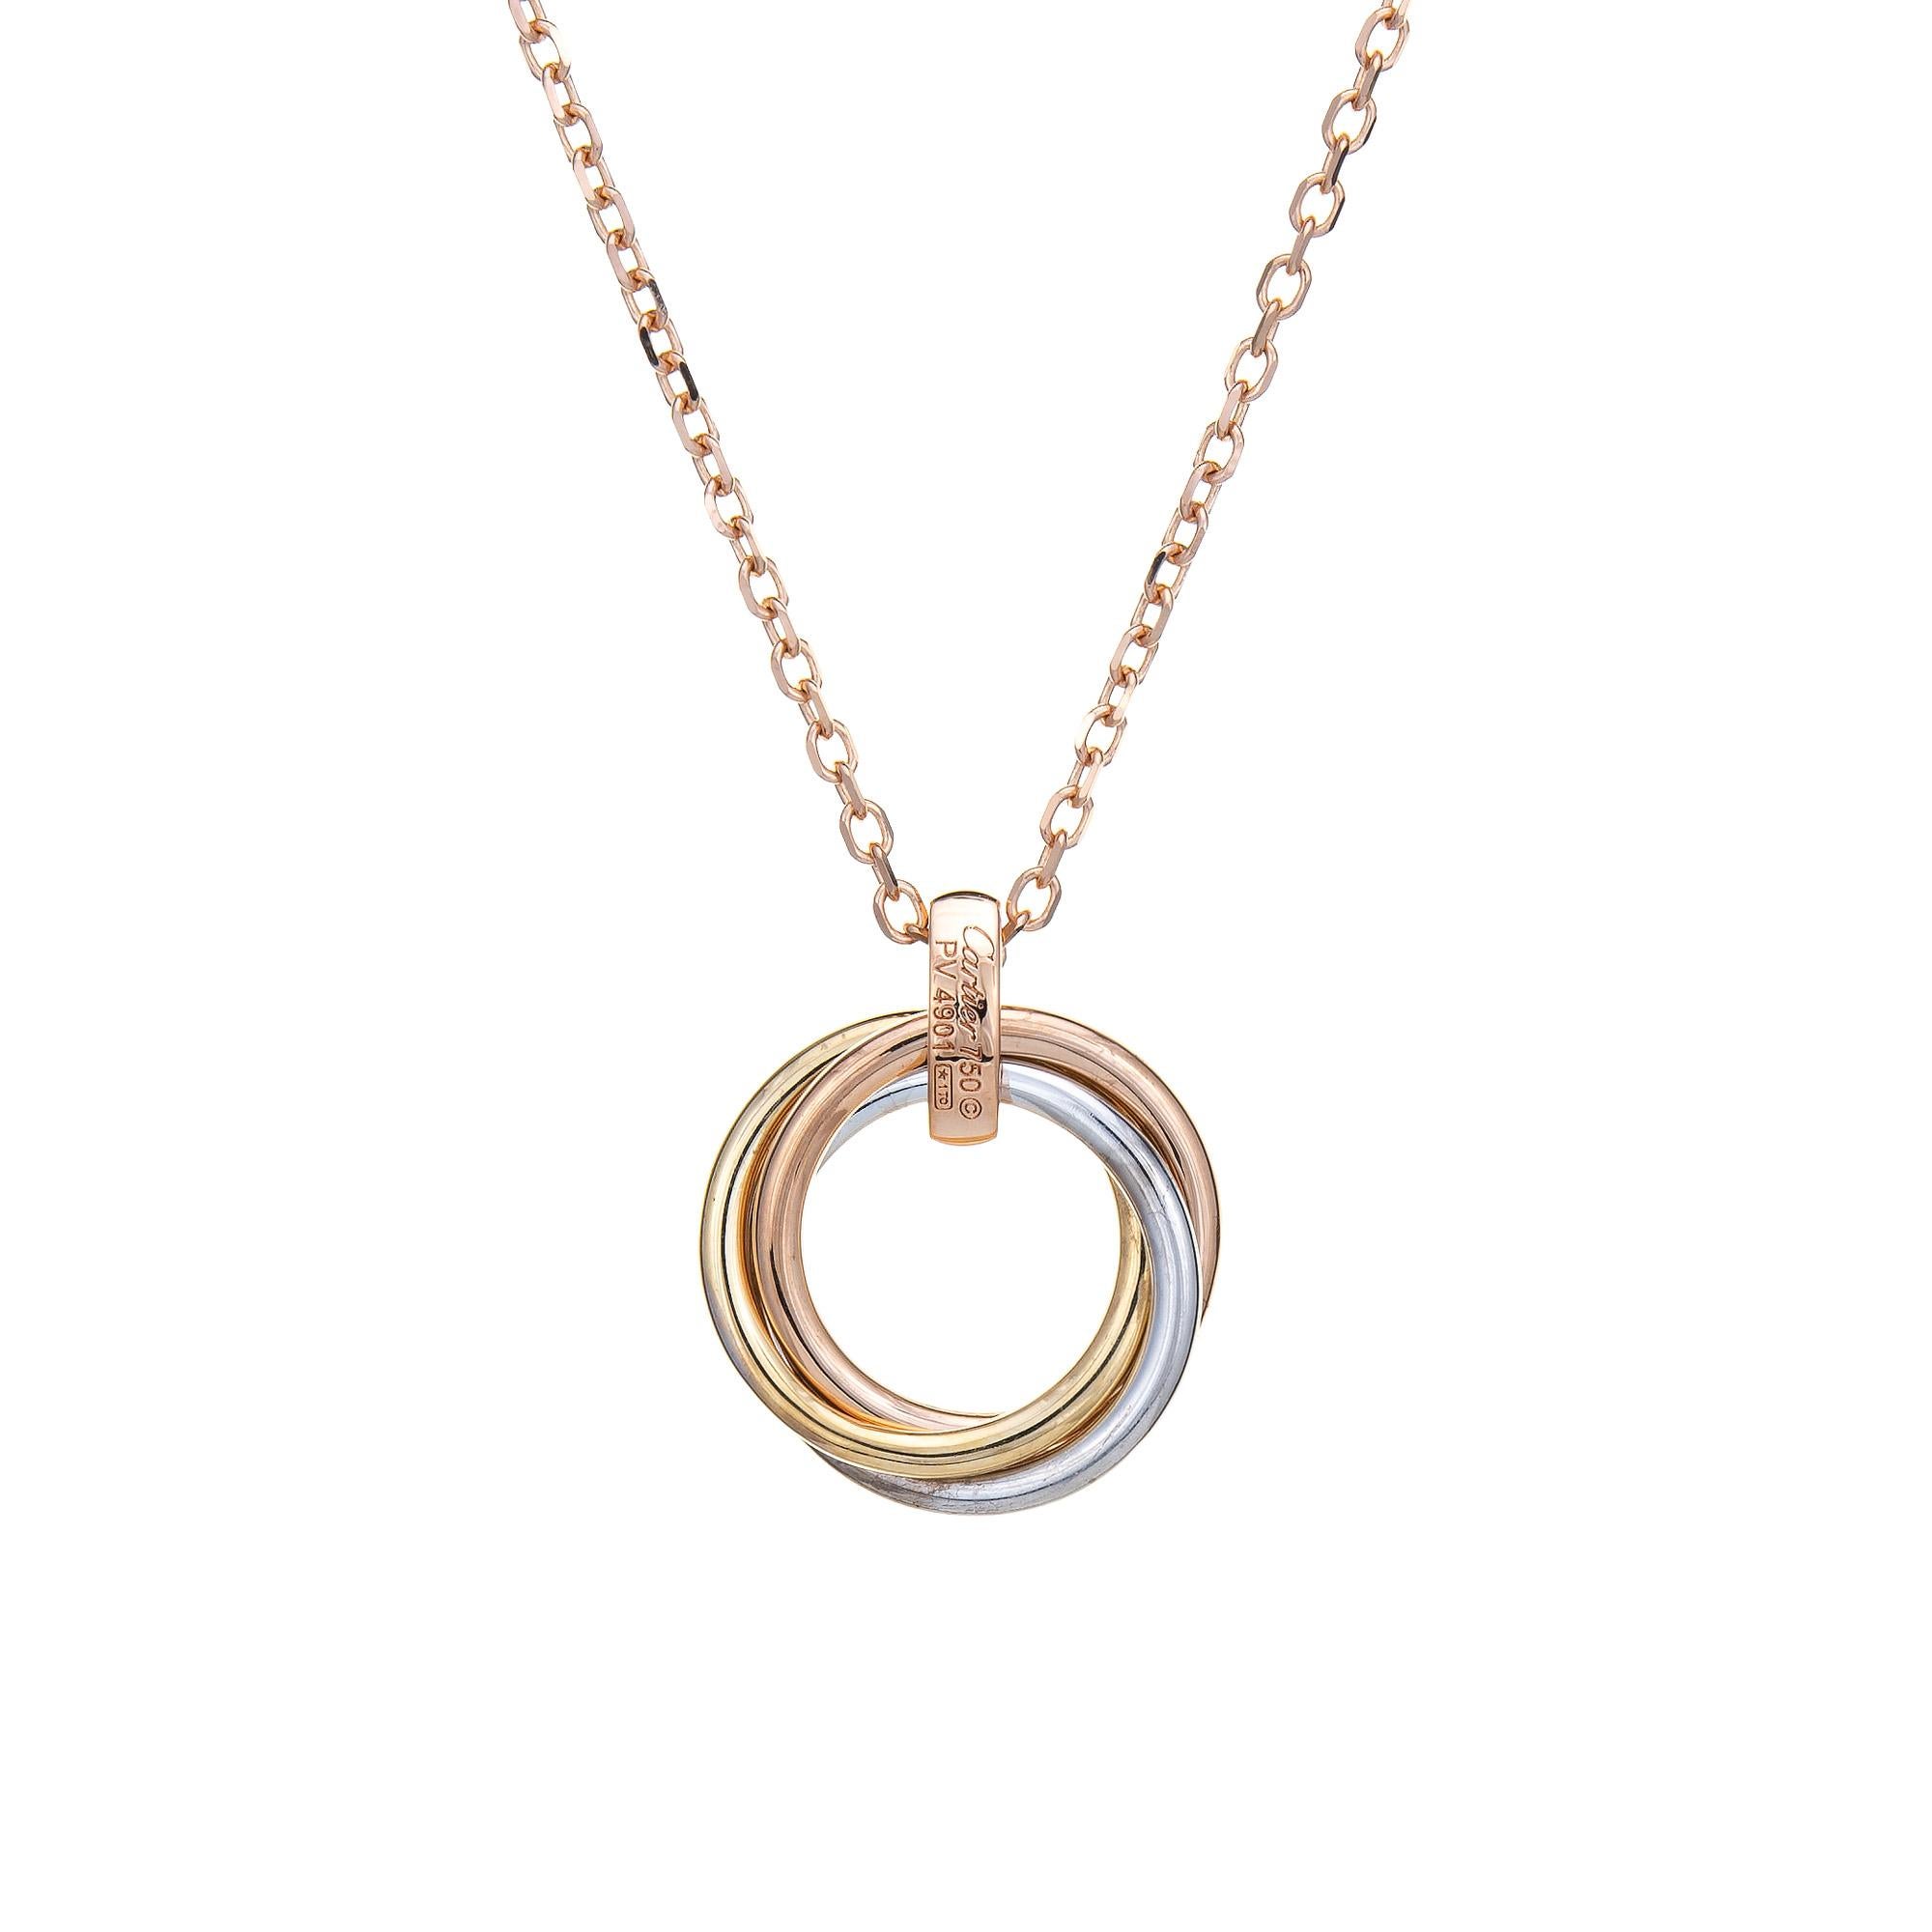 Pre-owned Cartier Trinity necklace crafted in 18k yellow, white & rose gold.  

The Cartier necklace features bands of 18k rose, yellow & white gold with a diamond set bale. Each band measures 1.8mm wide. The necklace is great worn alone or layered